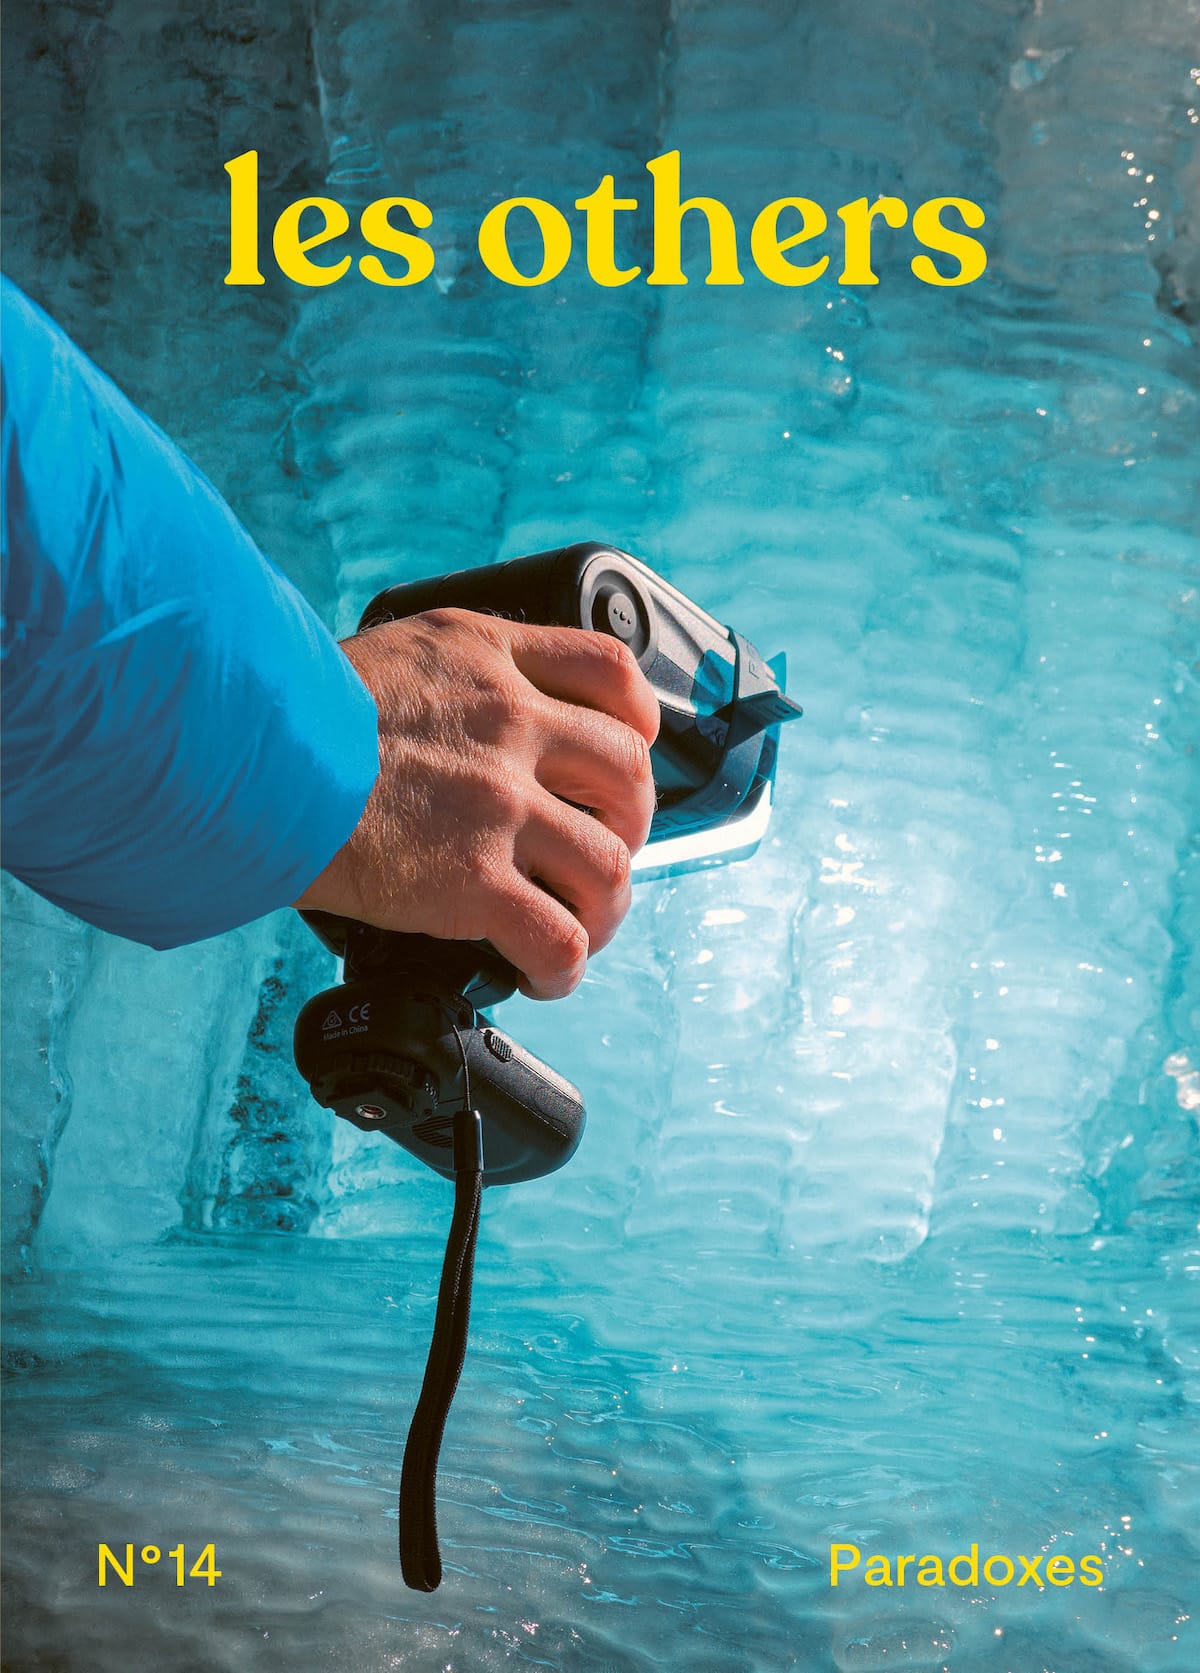 Les Others Volume 14 I Paradoxes